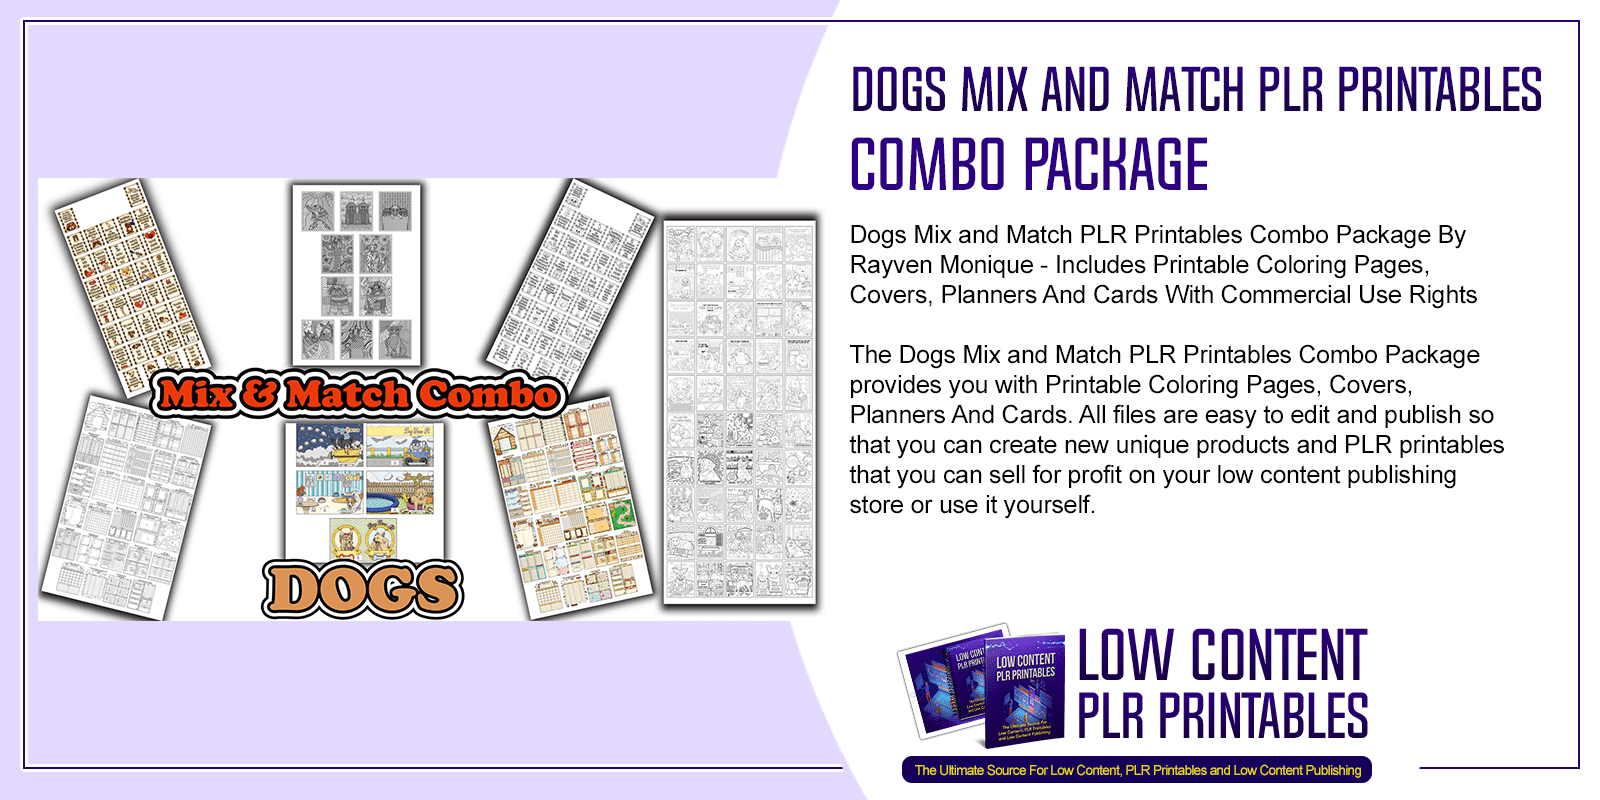 Dogs Mix and Match PLR Printables Combo Package